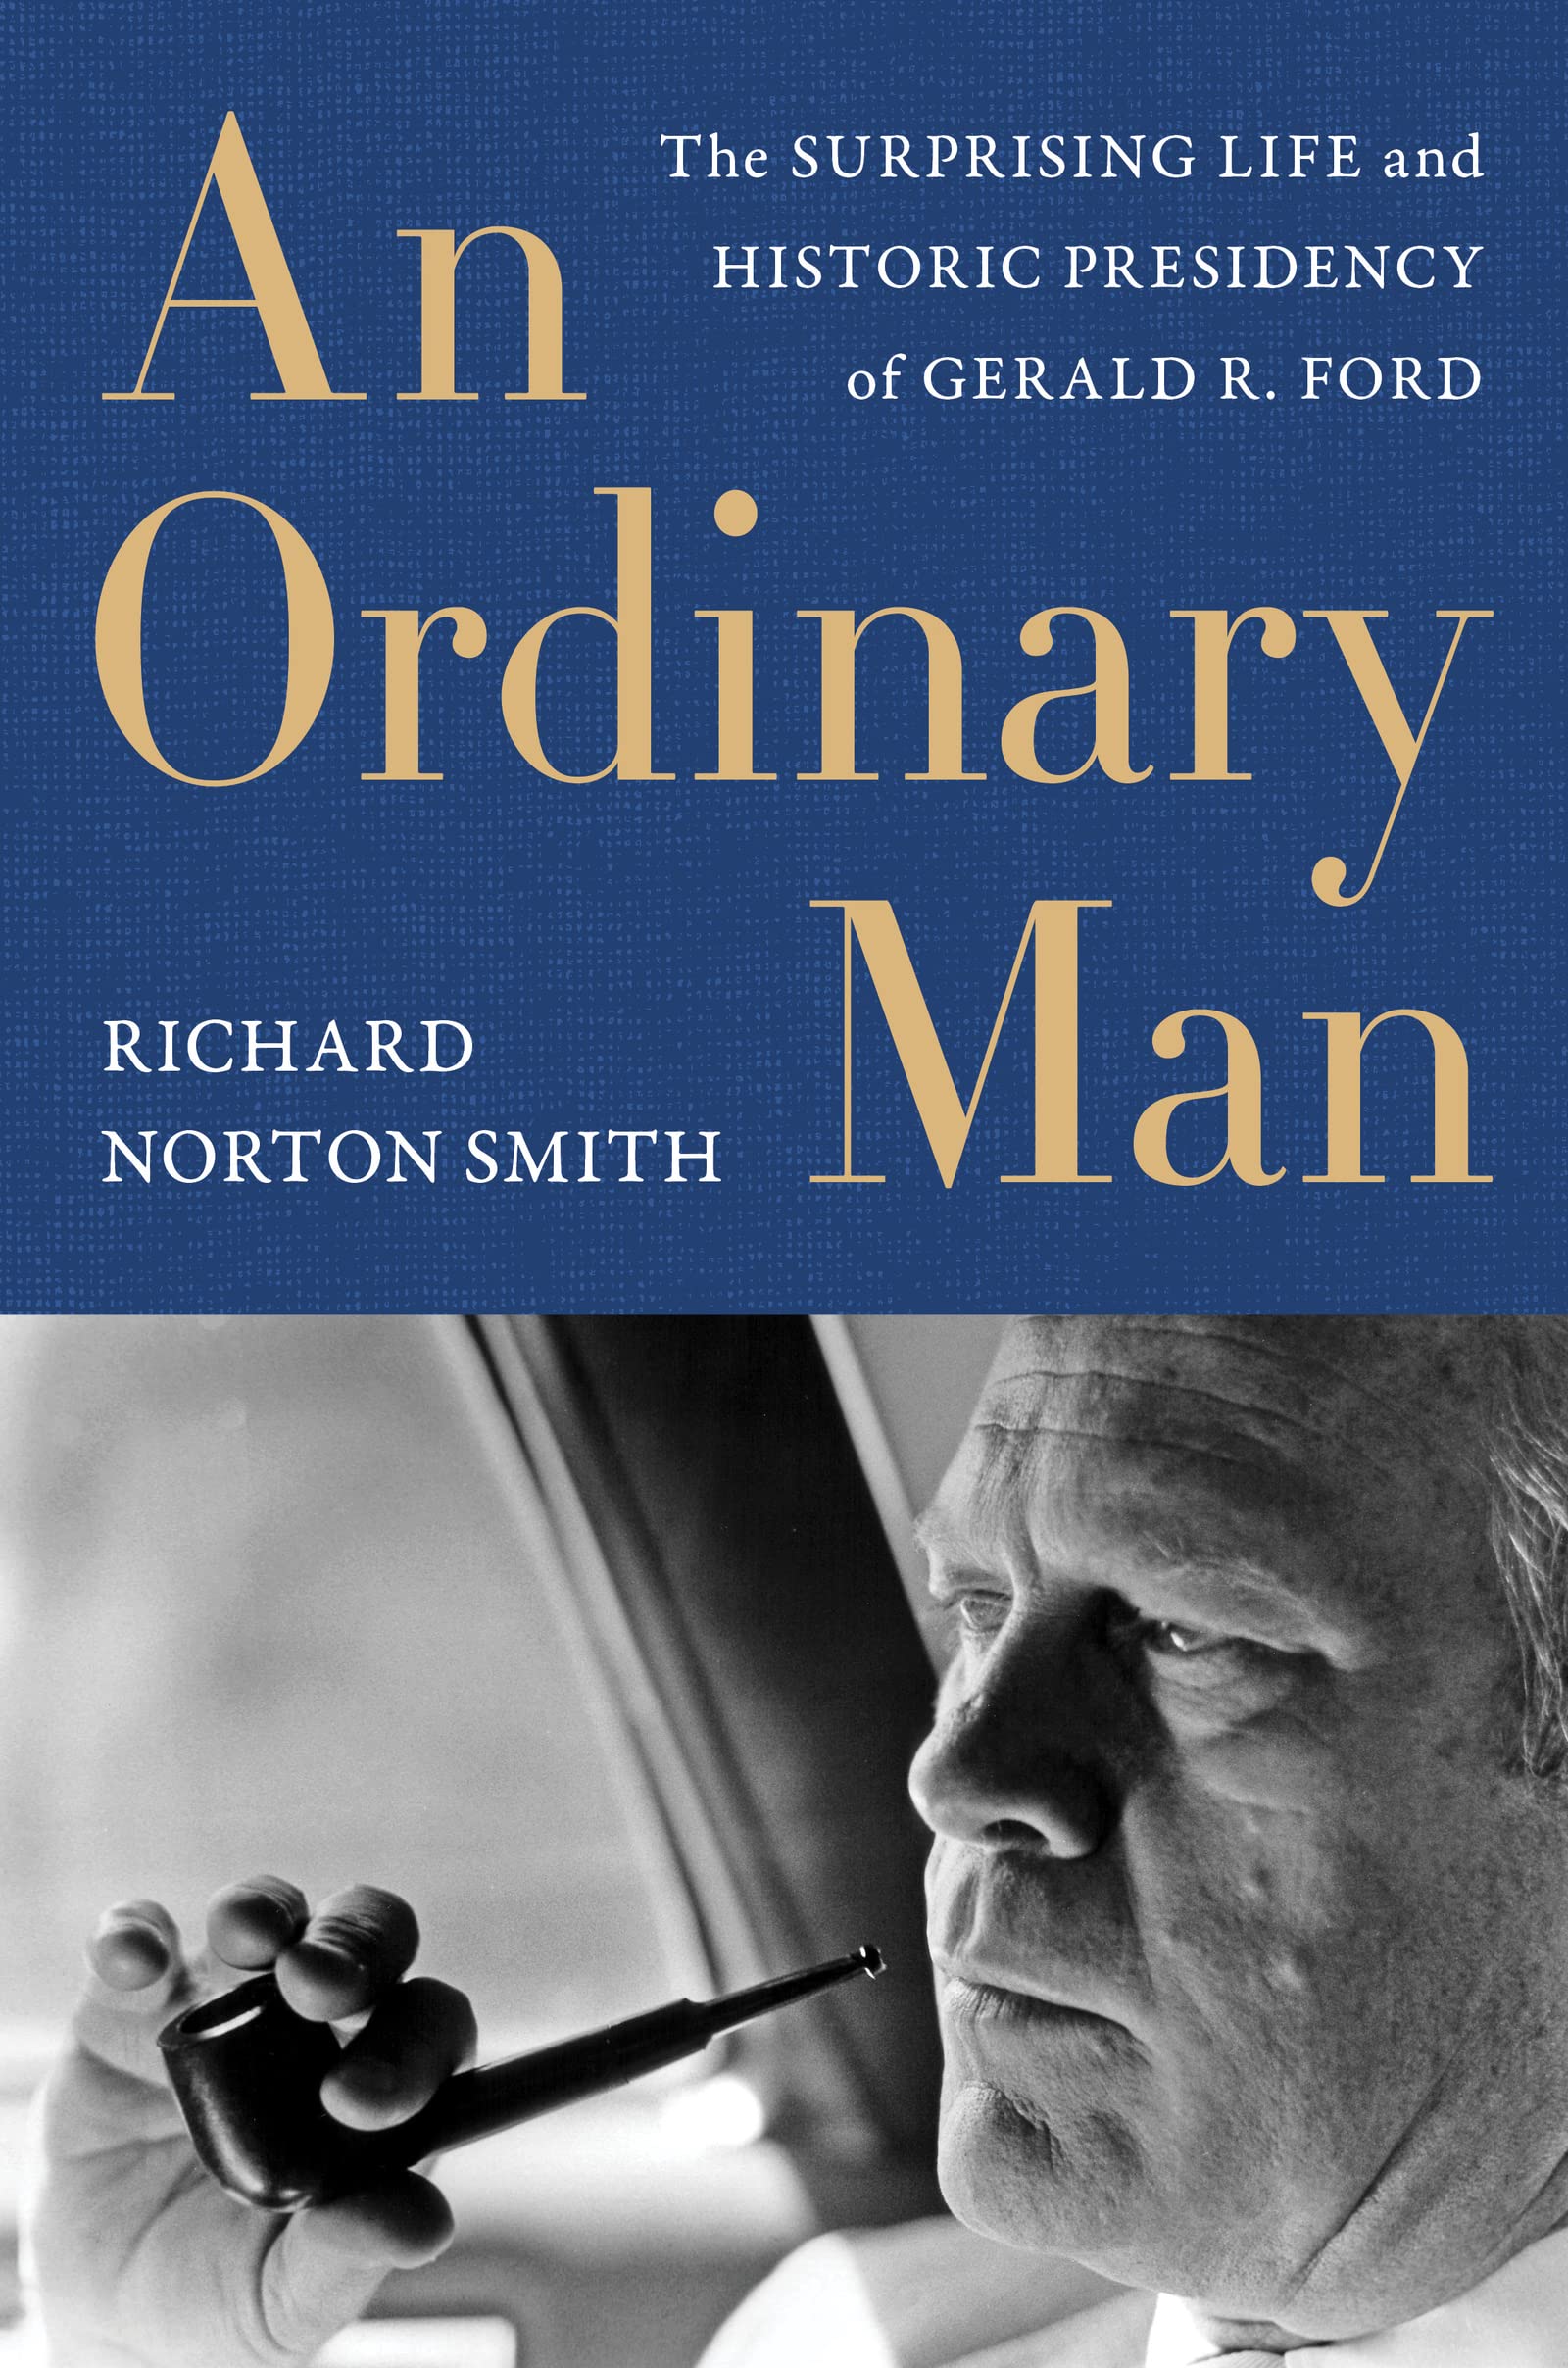 Book: An Ordinary Man Autographed by Richard Norton Smith